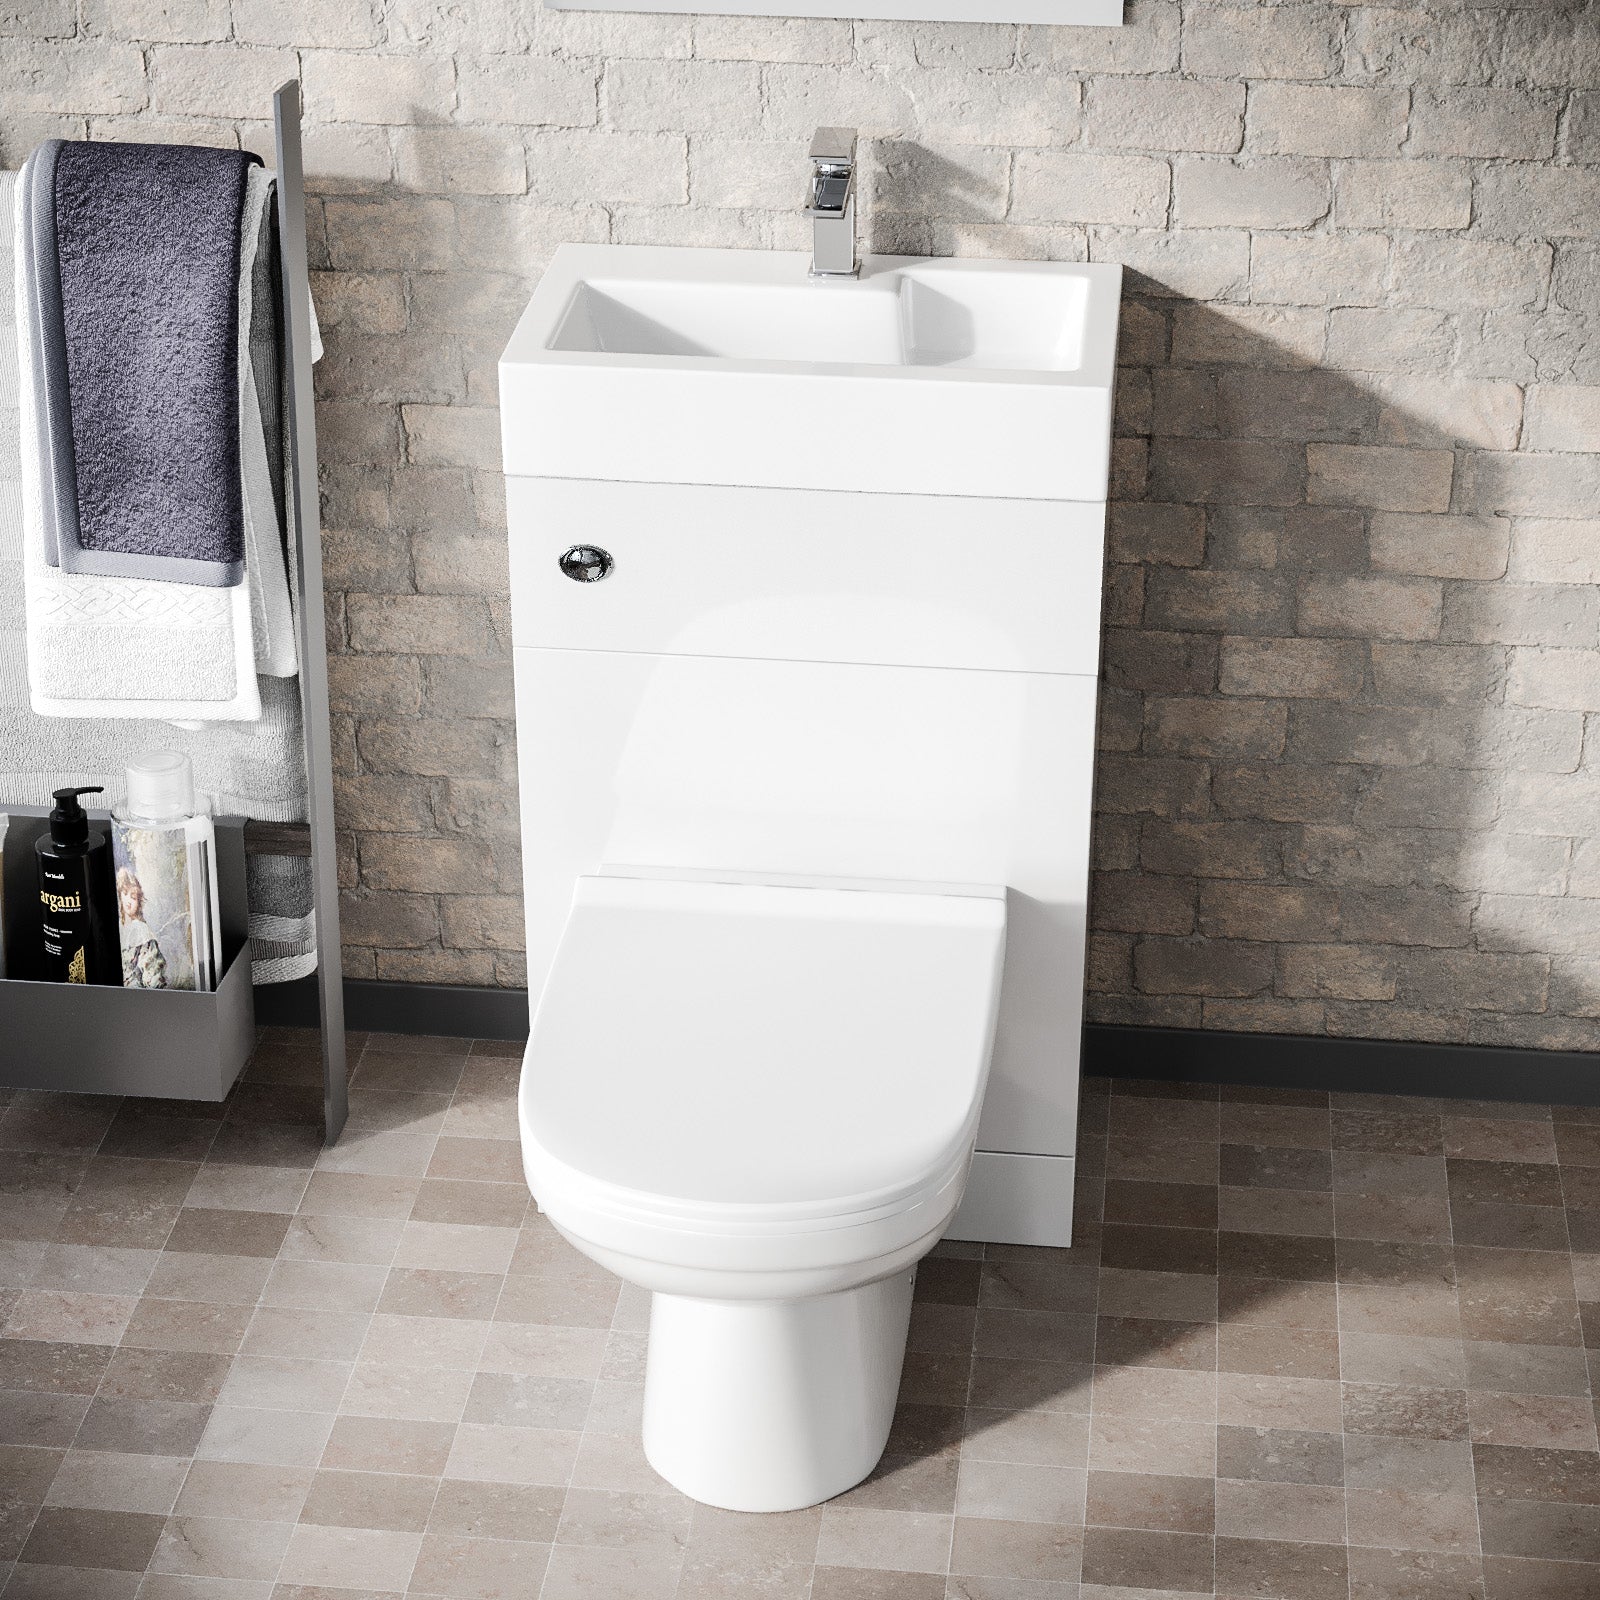 Debra 2 in 1 Compact Basin and Back to Wall Rimless Toilet Combo Space Save Cloakroom